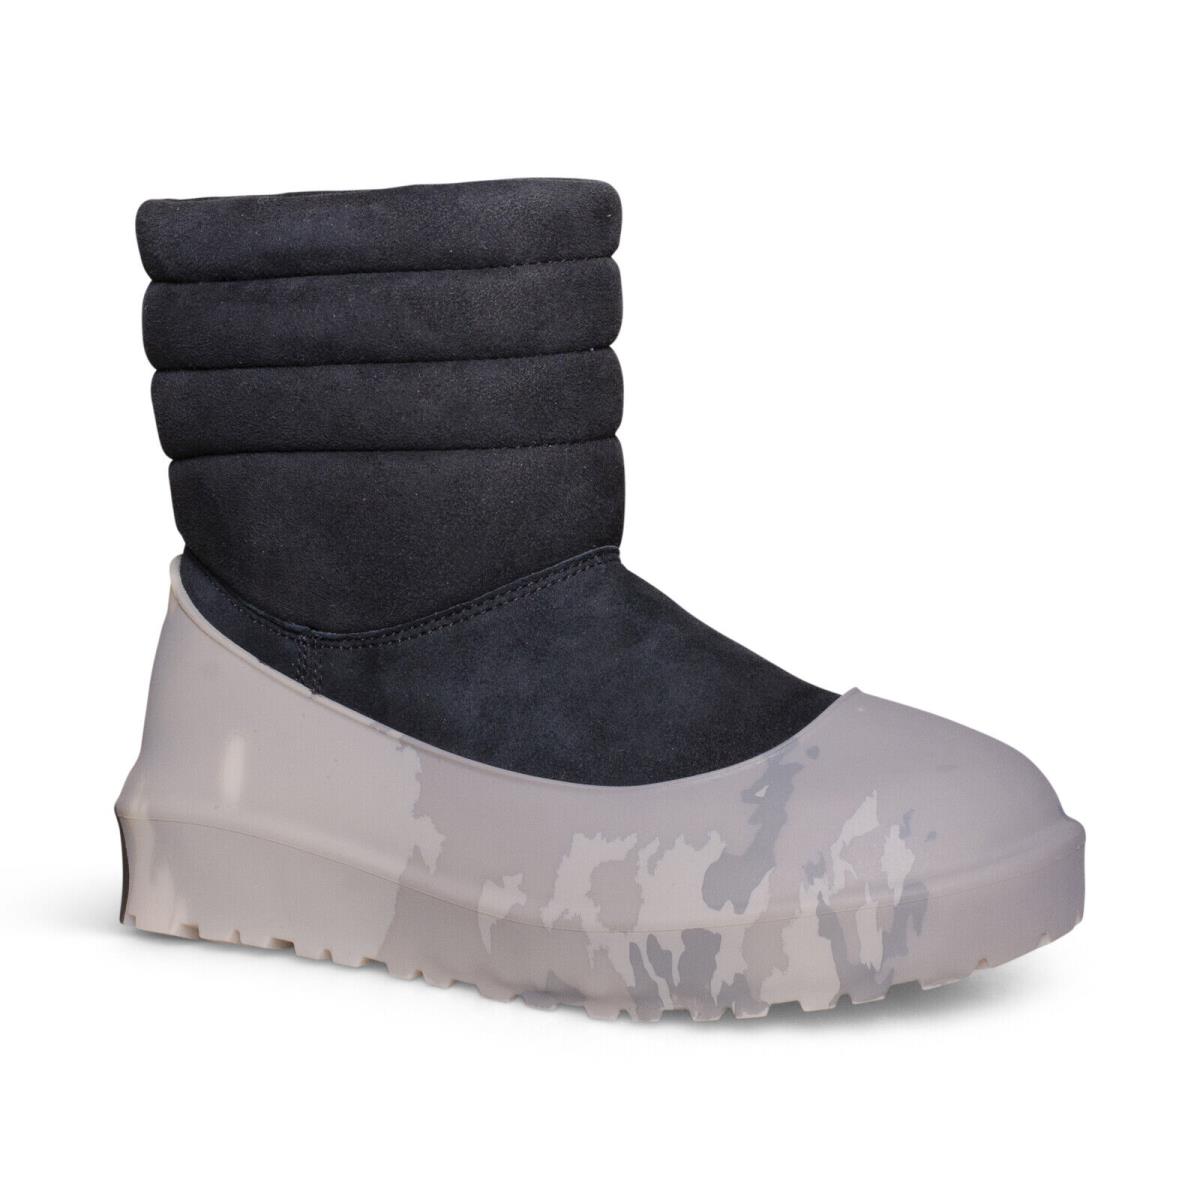 Ugg X Stampd Classic Pull ON Black Suede All Gender Boots Size US M12/W13